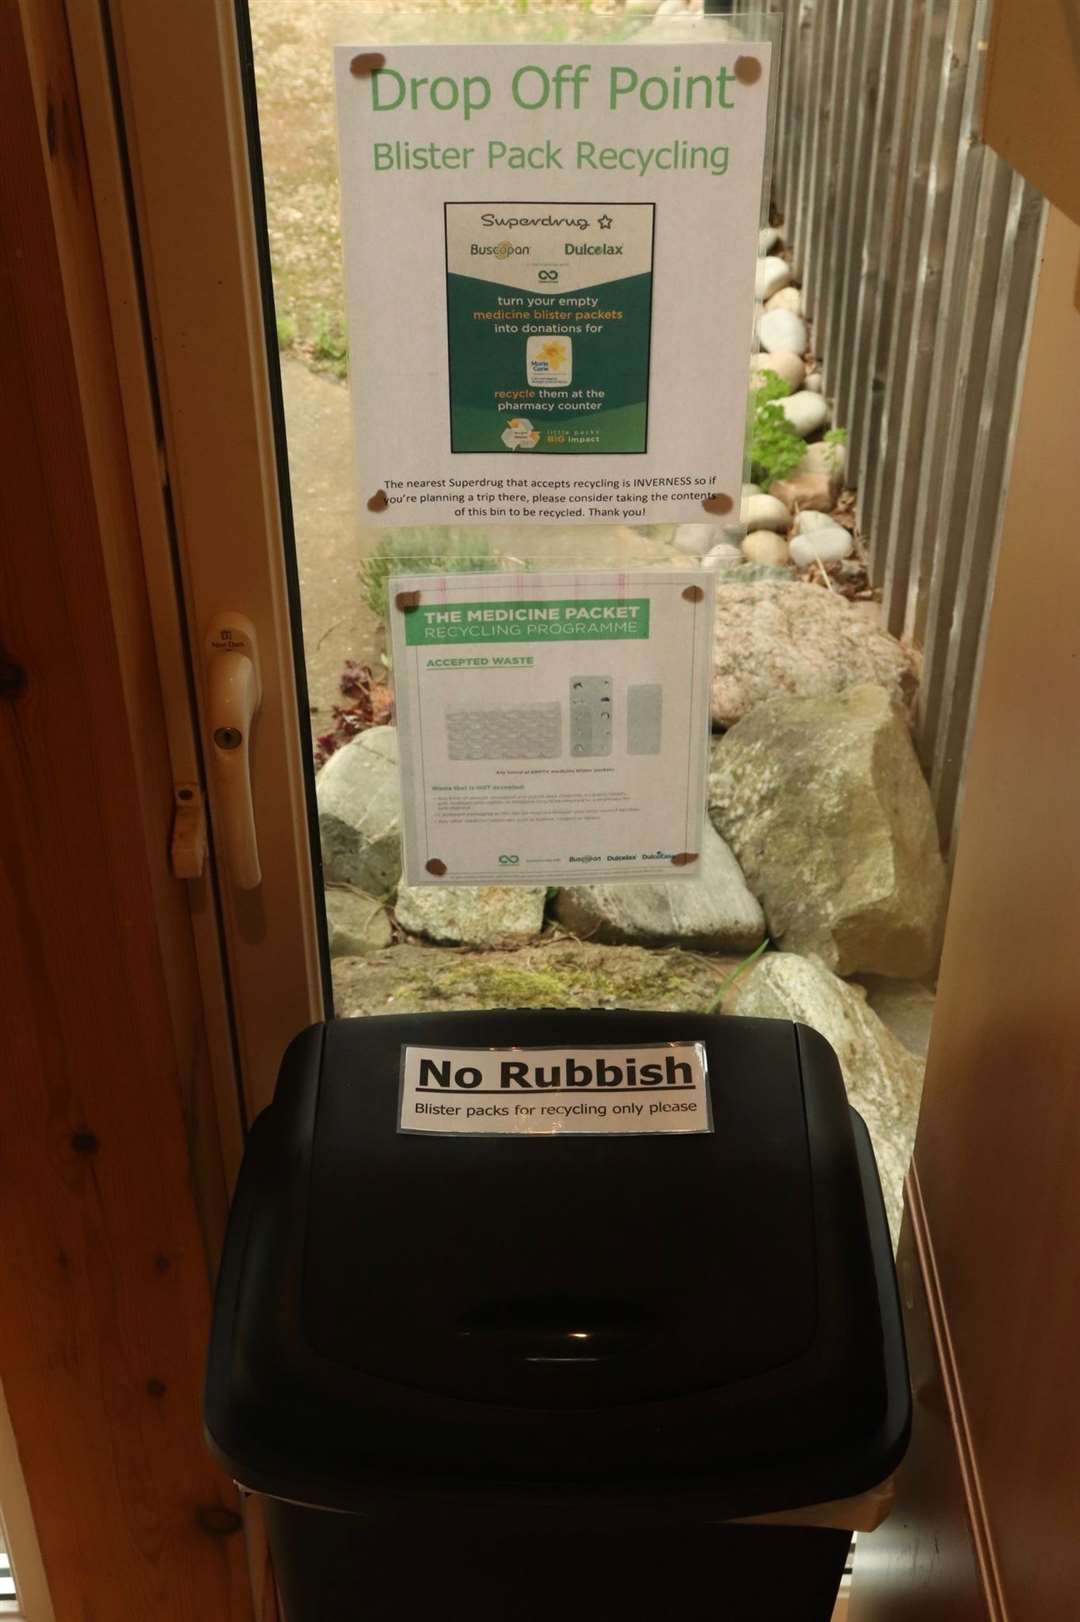 Residents in Findhorn are taking part in the new recycling scheme.